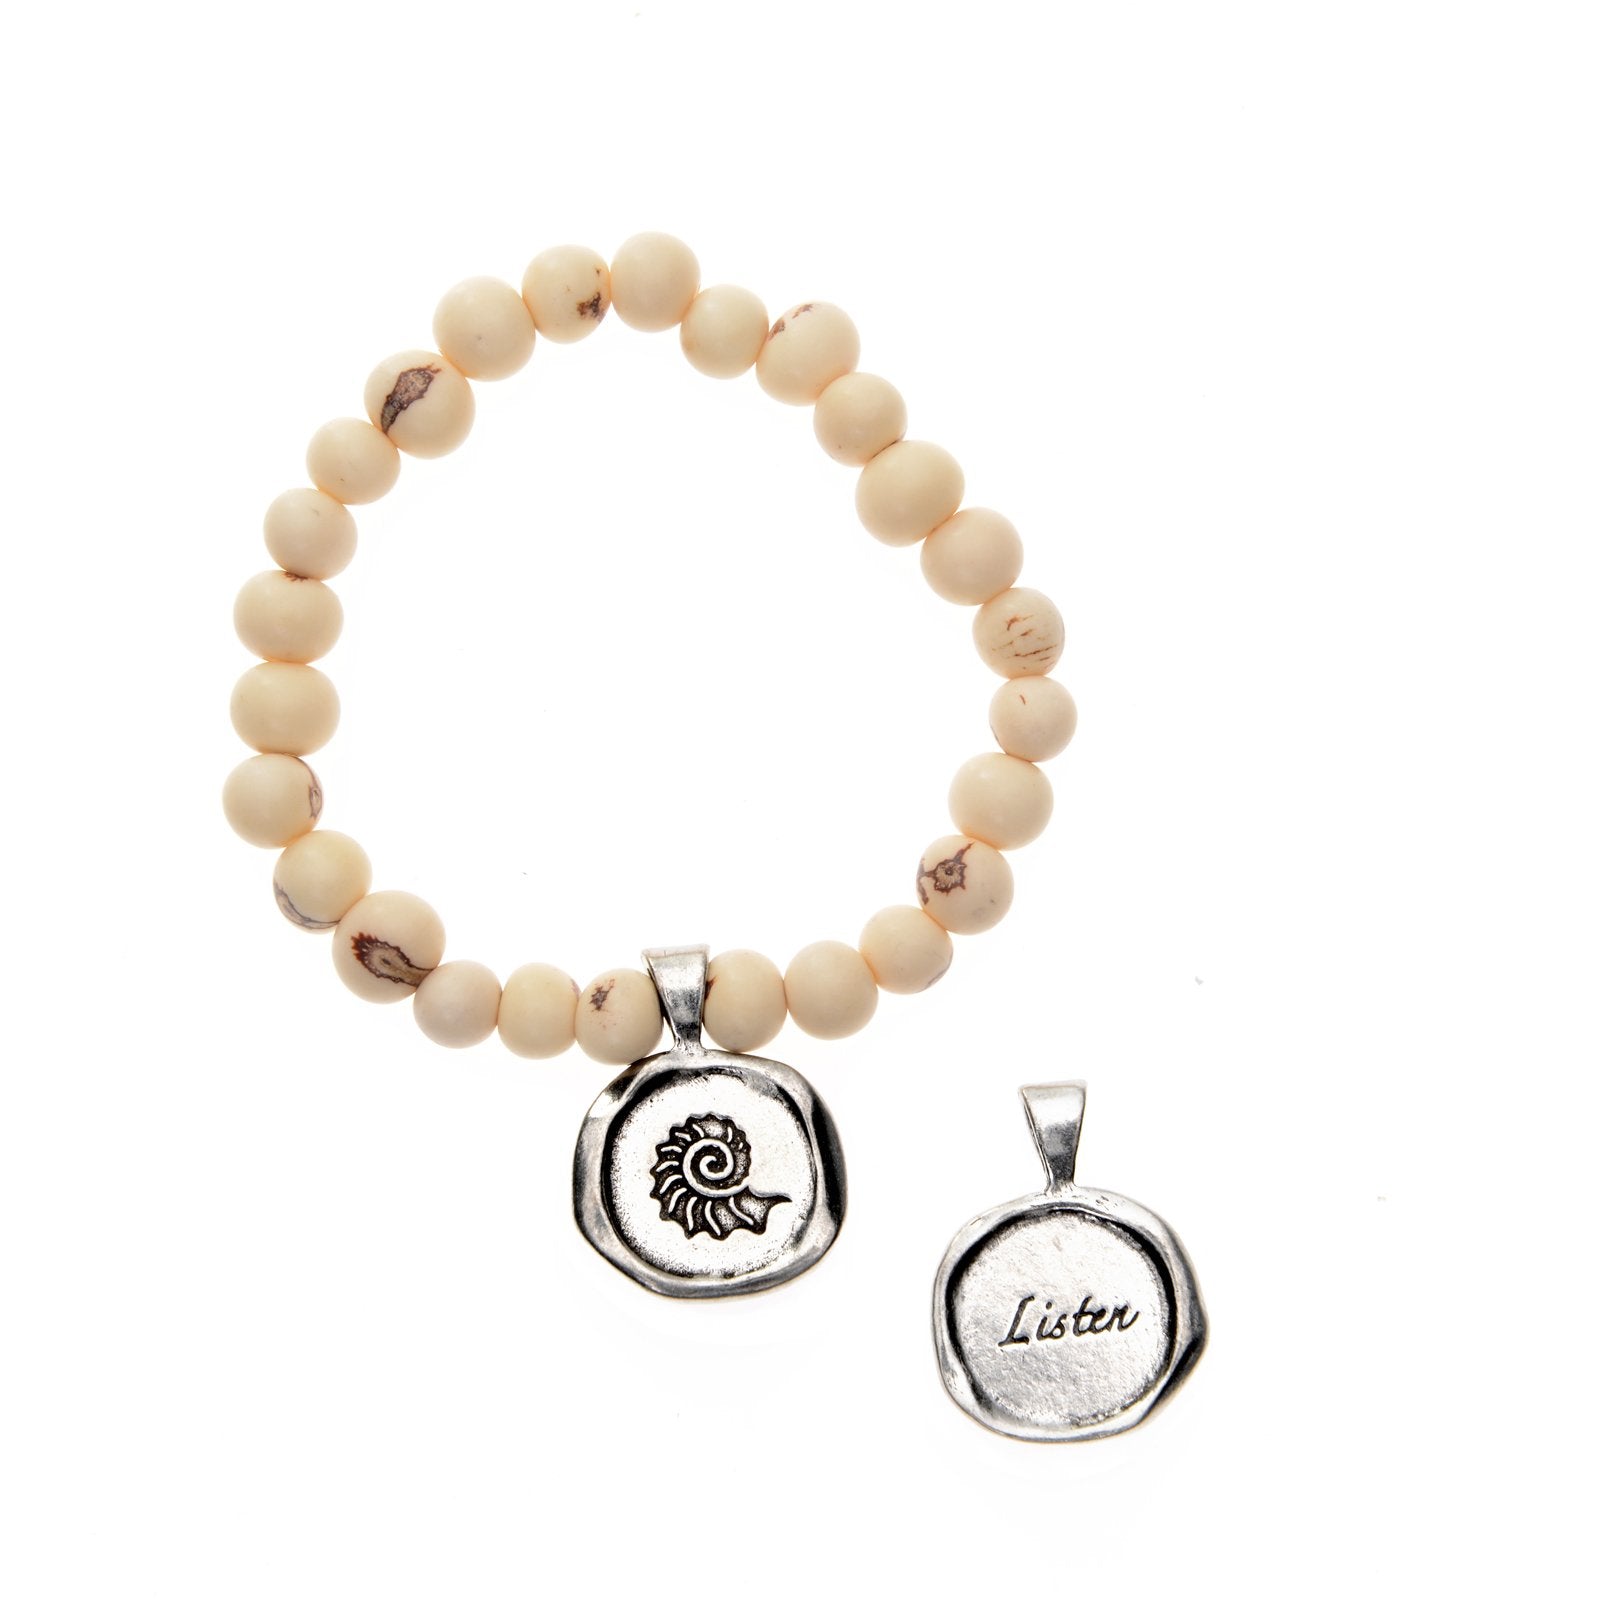 White Acai Seeds of Life Bracelet with Wax Seal - Whitney Howard Designs